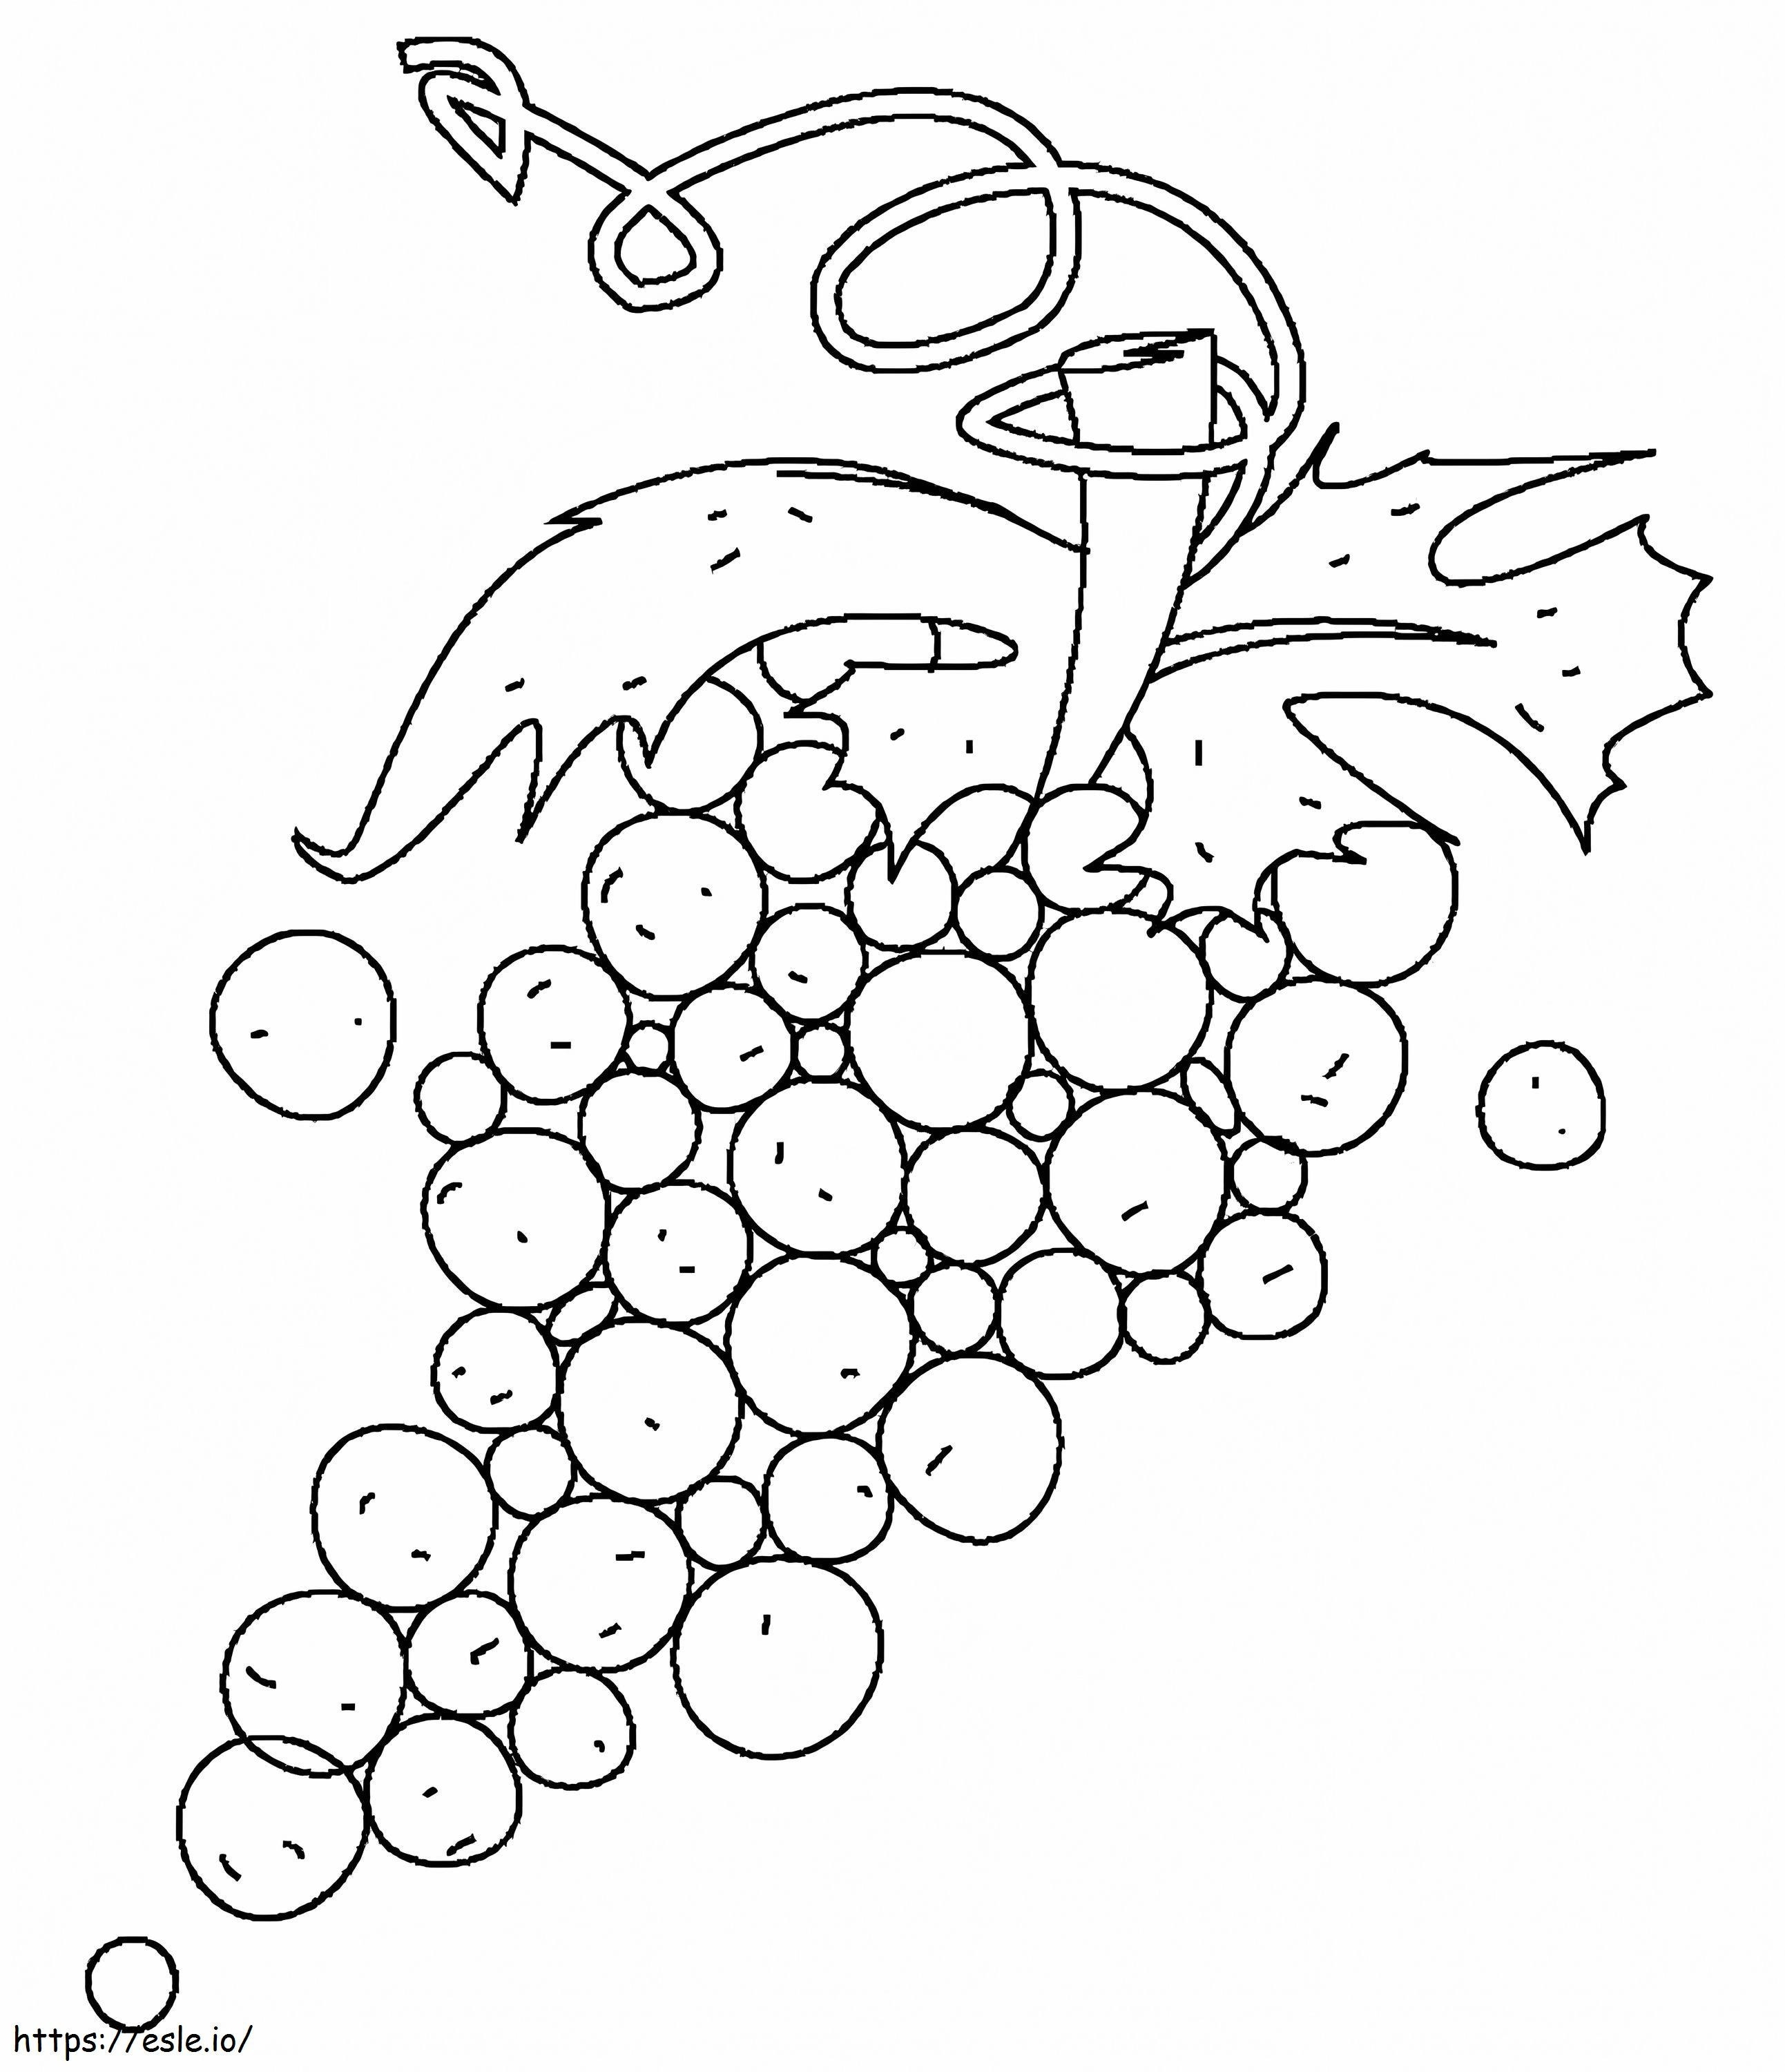 Images Without Grapes coloring page